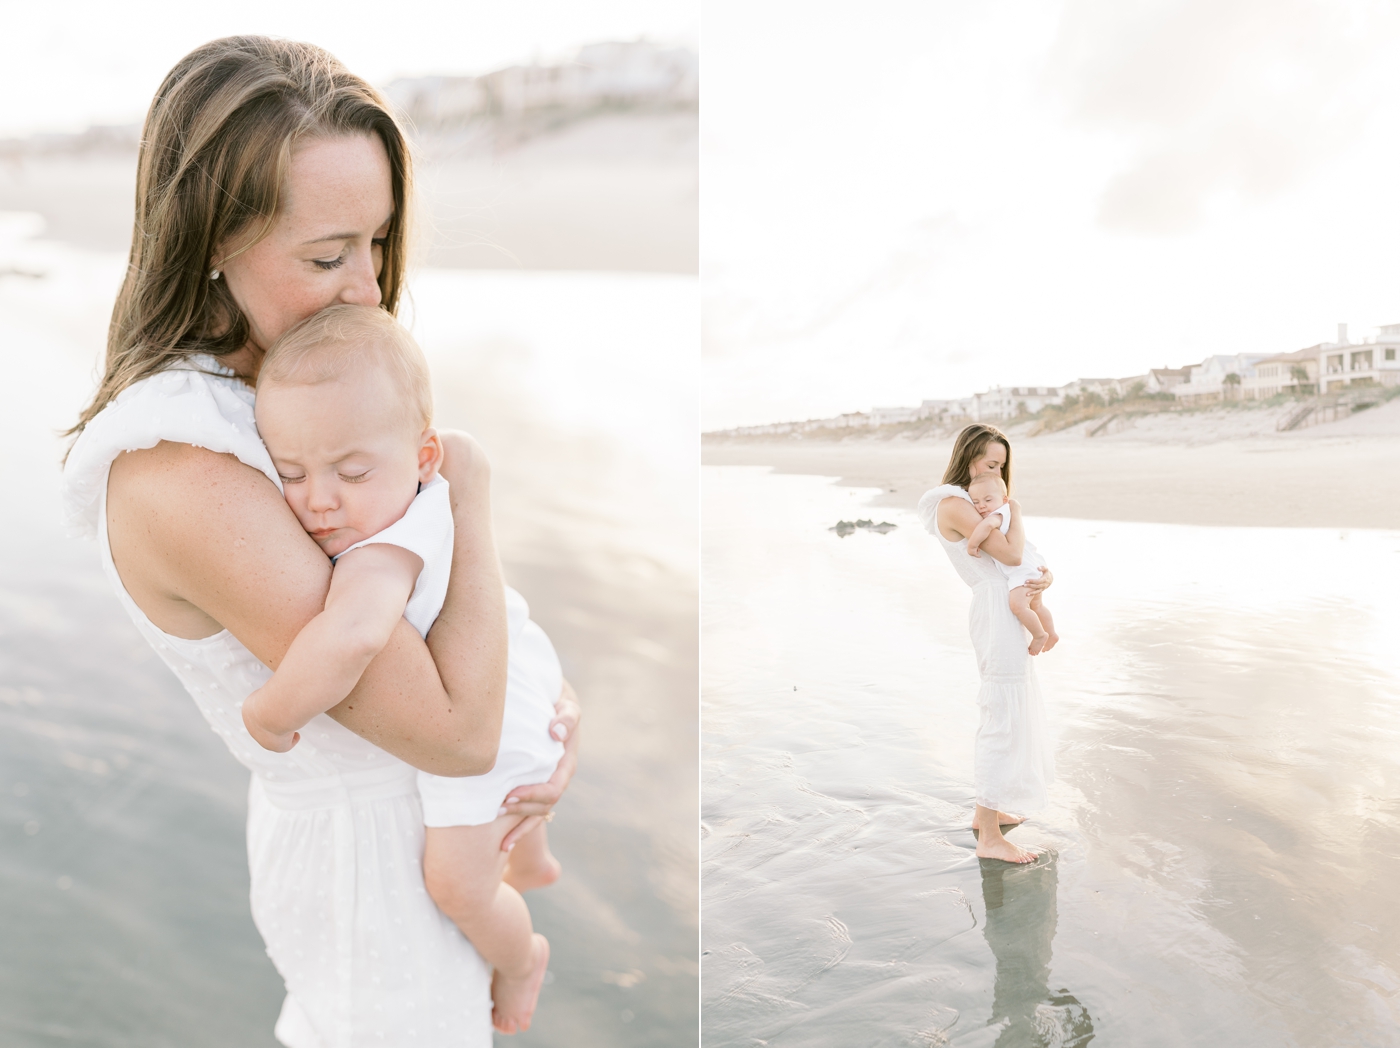 Mom holding her baby boy at the beach during their isle of palms beach session | Photo by Caitlyn Motycka Photography.